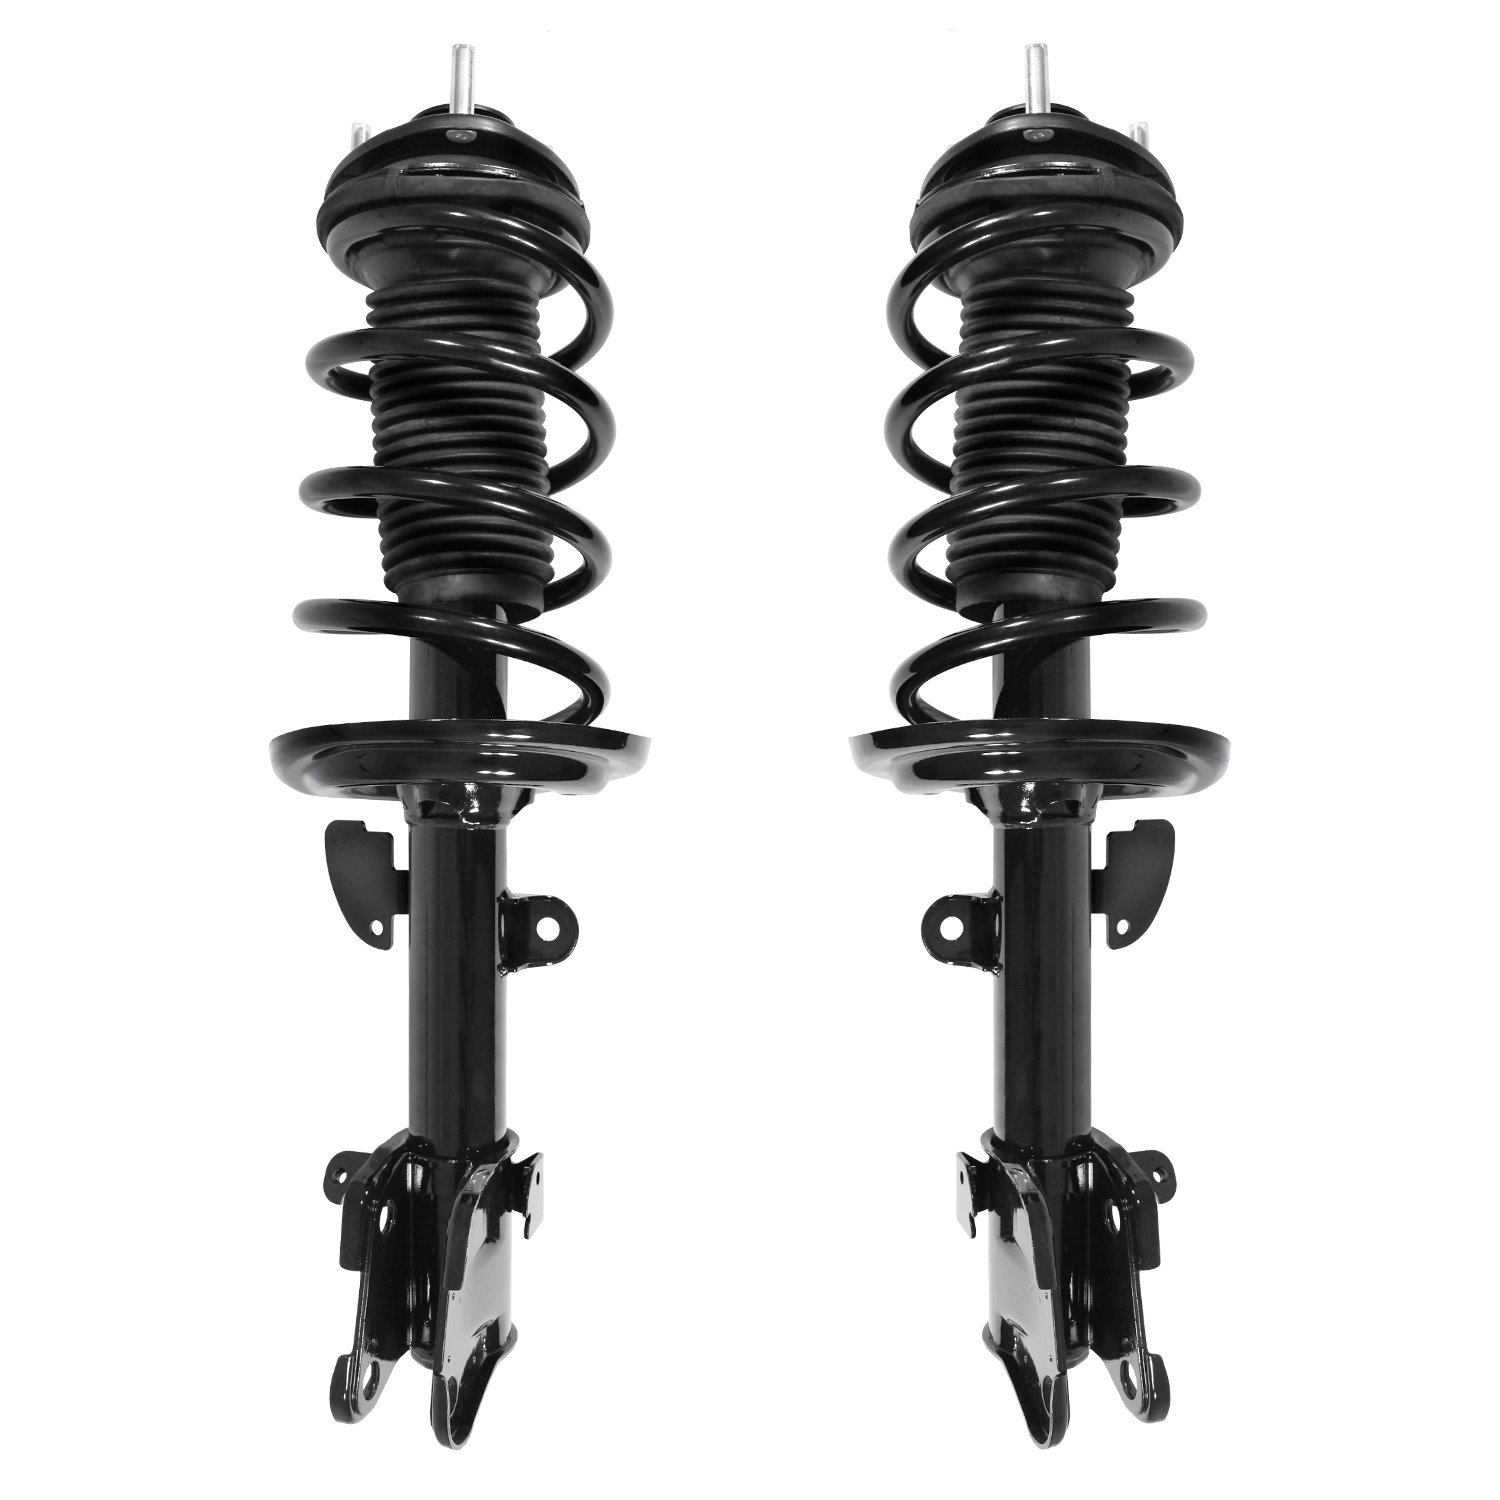 2-11713-11714-001 Suspension Strut & Coil Spring Assembly Set Fits Select Acura ZDX, Acura MDX